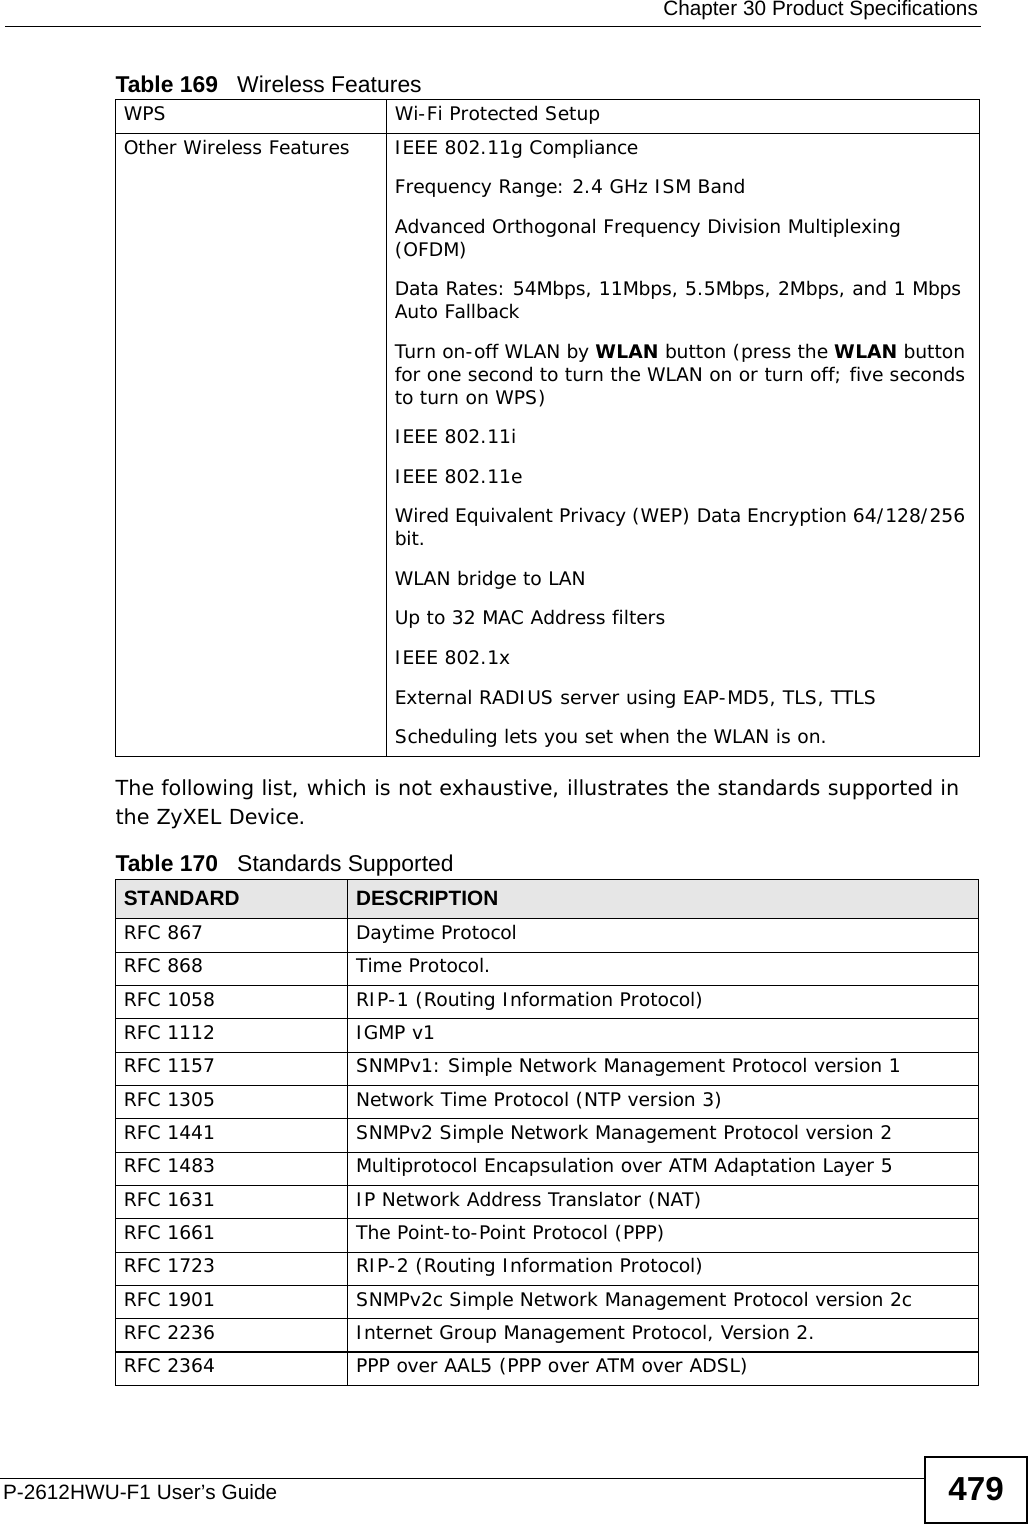  Chapter 30 Product SpecificationsP-2612HWU-F1 User’s Guide 479The following list, which is not exhaustive, illustrates the standards supported in the ZyXEL Device.WPS Wi-Fi Protected SetupOther Wireless Features IEEE 802.11g ComplianceFrequency Range: 2.4 GHz ISM BandAdvanced Orthogonal Frequency Division Multiplexing (OFDM)Data Rates: 54Mbps, 11Mbps, 5.5Mbps, 2Mbps, and 1 Mbps Auto FallbackTurn on-off WLAN by WLAN button (press the WLAN button for one second to turn the WLAN on or turn off; five seconds to turn on WPS)IEEE 802.11iIEEE 802.11eWired Equivalent Privacy (WEP) Data Encryption 64/128/256 bit.WLAN bridge to LANUp to 32 MAC Address filtersIEEE 802.1xExternal RADIUS server using EAP-MD5, TLS, TTLSScheduling lets you set when the WLAN is on. Table 170   Standards Supported STANDARD DESCRIPTIONRFC 867 Daytime ProtocolRFC 868 Time Protocol.RFC 1058 RIP-1 (Routing Information Protocol)RFC 1112 IGMP v1RFC 1157 SNMPv1: Simple Network Management Protocol version 1RFC 1305 Network Time Protocol (NTP version 3)RFC 1441 SNMPv2 Simple Network Management Protocol version 2RFC 1483 Multiprotocol Encapsulation over ATM Adaptation Layer 5RFC 1631 IP Network Address Translator (NAT)RFC 1661 The Point-to-Point Protocol (PPP)RFC 1723 RIP-2 (Routing Information Protocol)RFC 1901 SNMPv2c Simple Network Management Protocol version 2cRFC 2236 Internet Group Management Protocol, Version 2.RFC 2364 PPP over AAL5 (PPP over ATM over ADSL)Table 169   Wireless Features